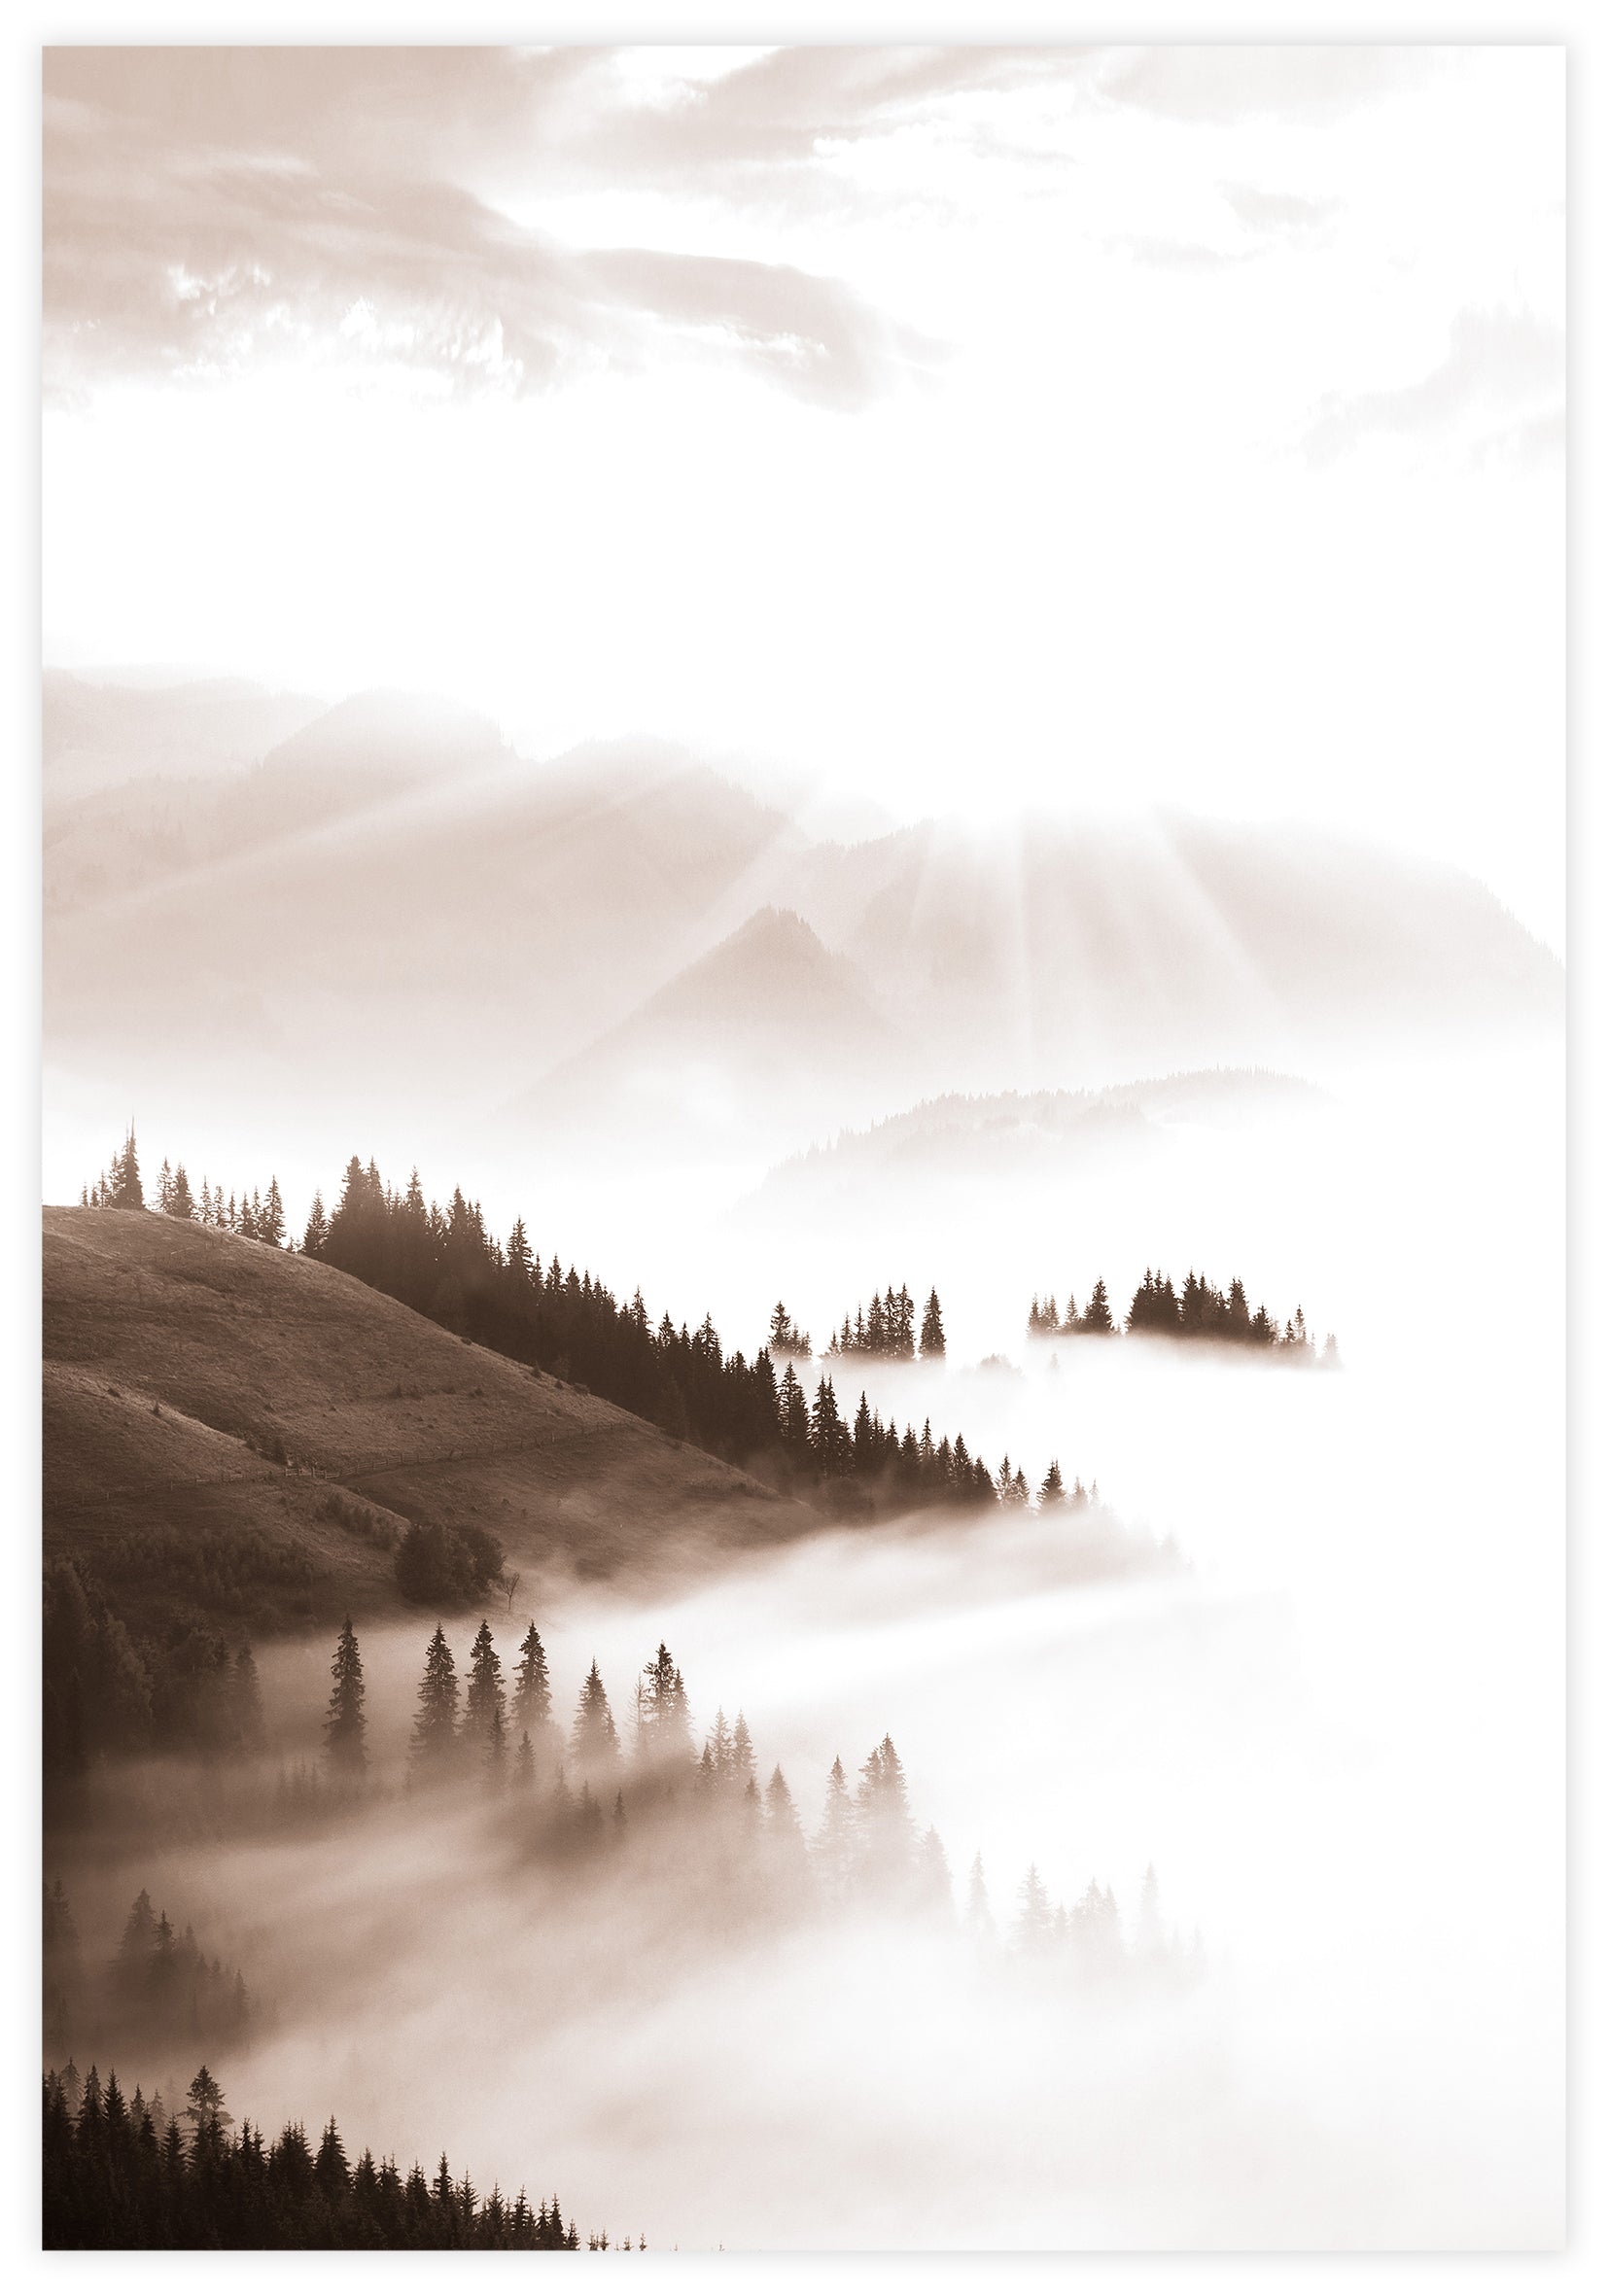 Foggy Forest Poster